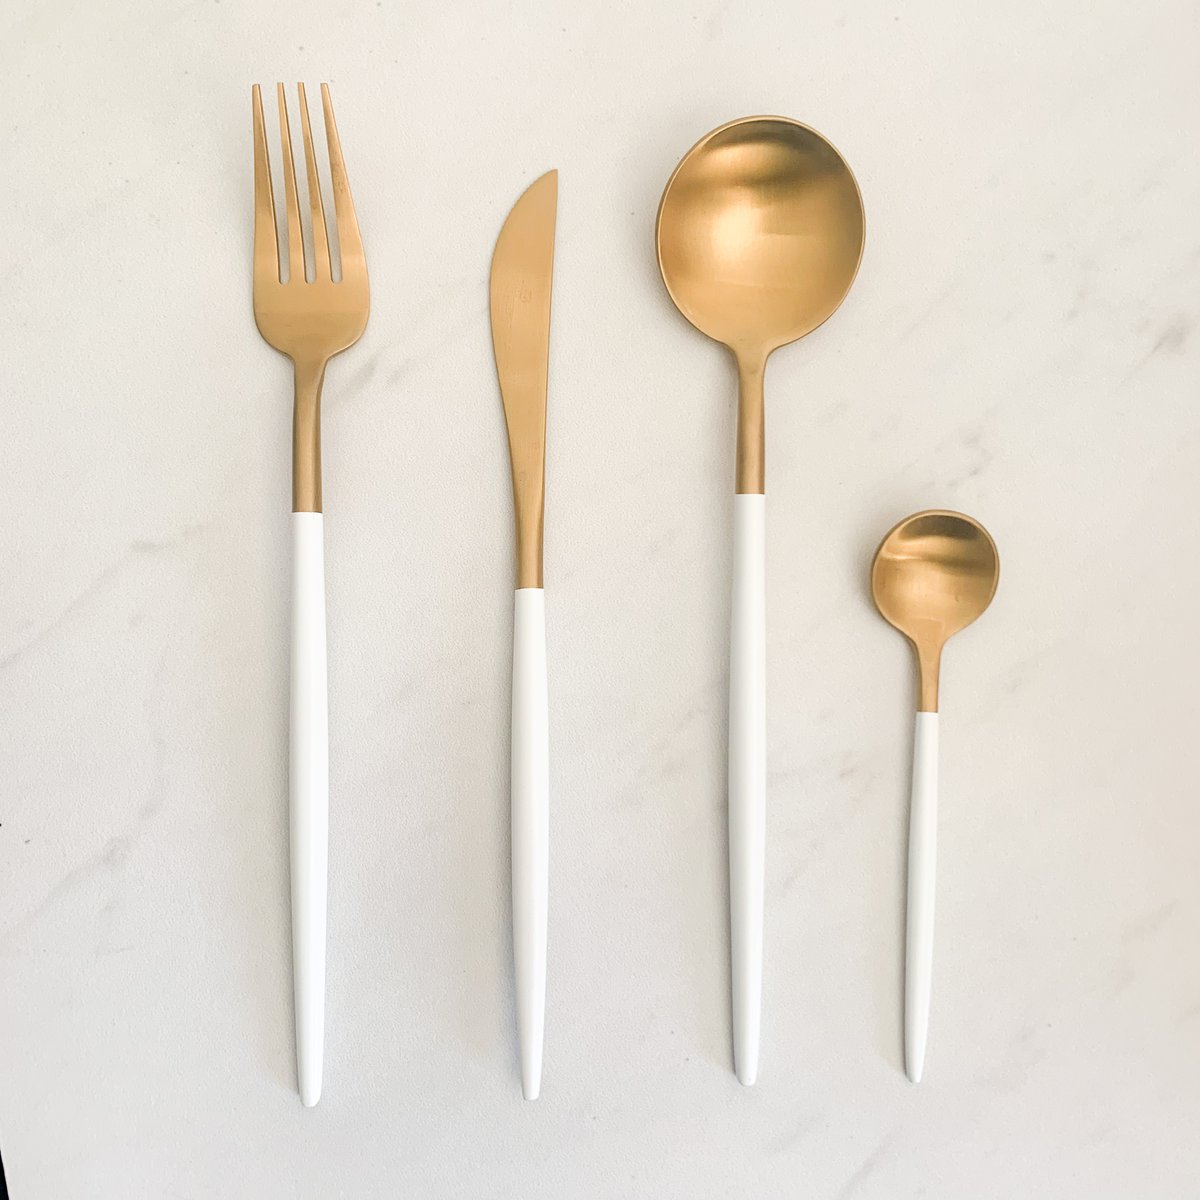 Art Deco Moon Cutlery White & Gold - <p style='text-align: center;'><b>HOT NEW ITEM</b><br>
R 10</p>